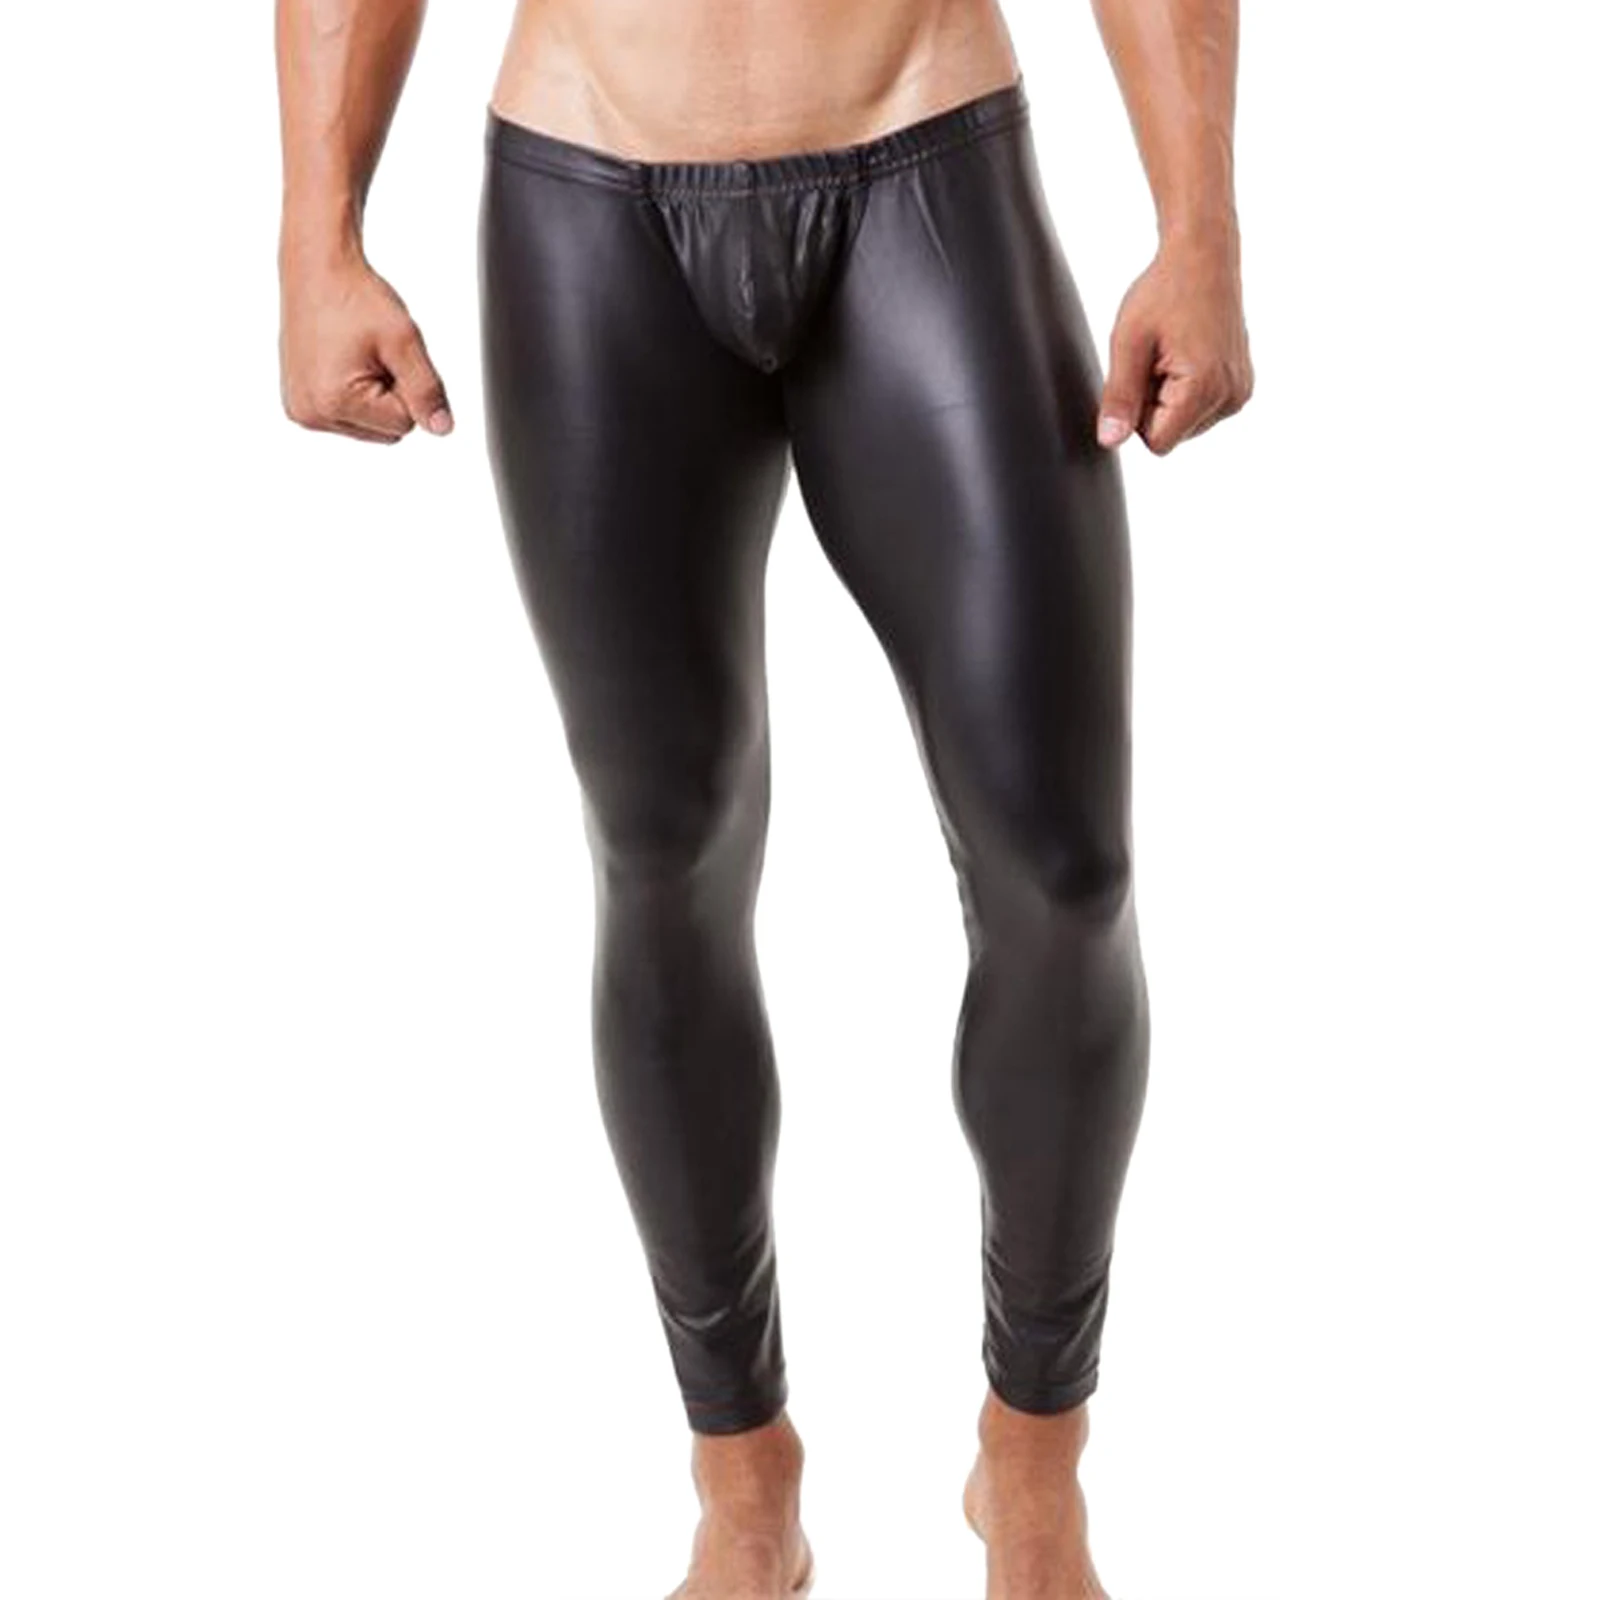 Men Patent Leather Tight Pants Elastic Waistband Bulge Pouch Skin-tight Pants Leggings Stretchy Fitness Sports Pants Clubwear